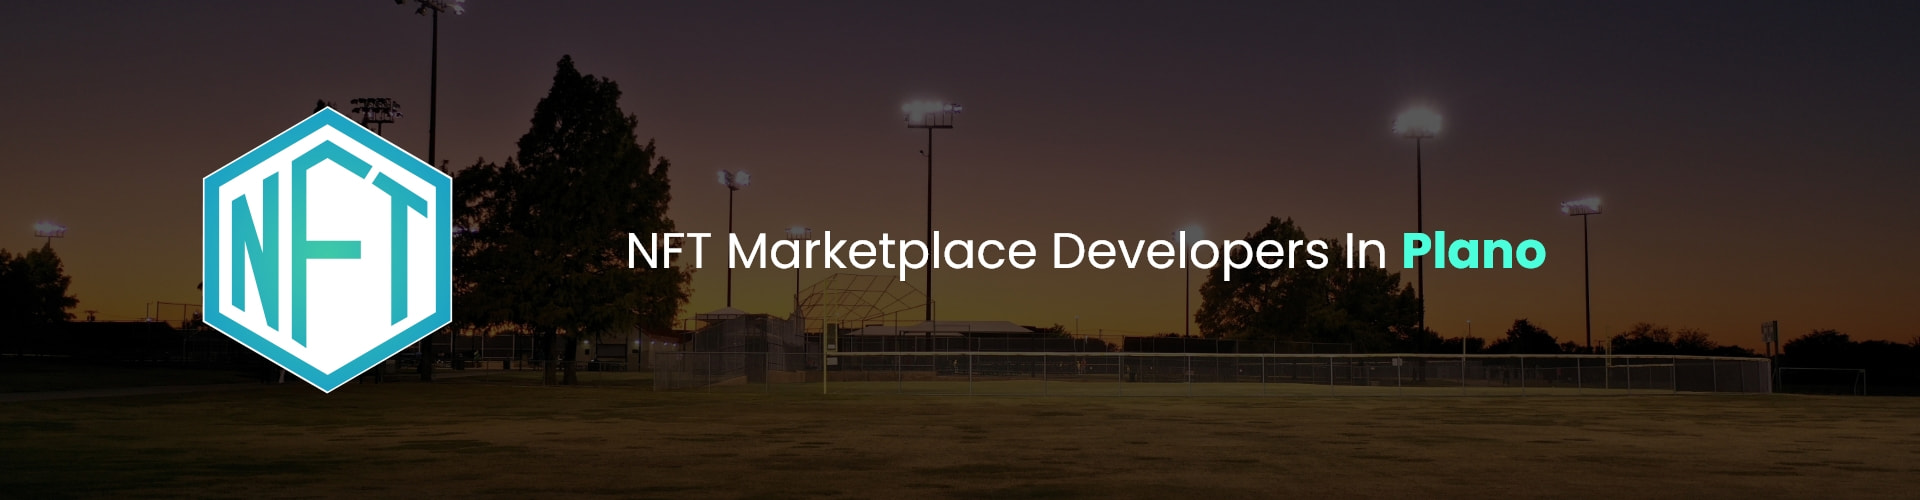 hire nft marketplace developers in plano